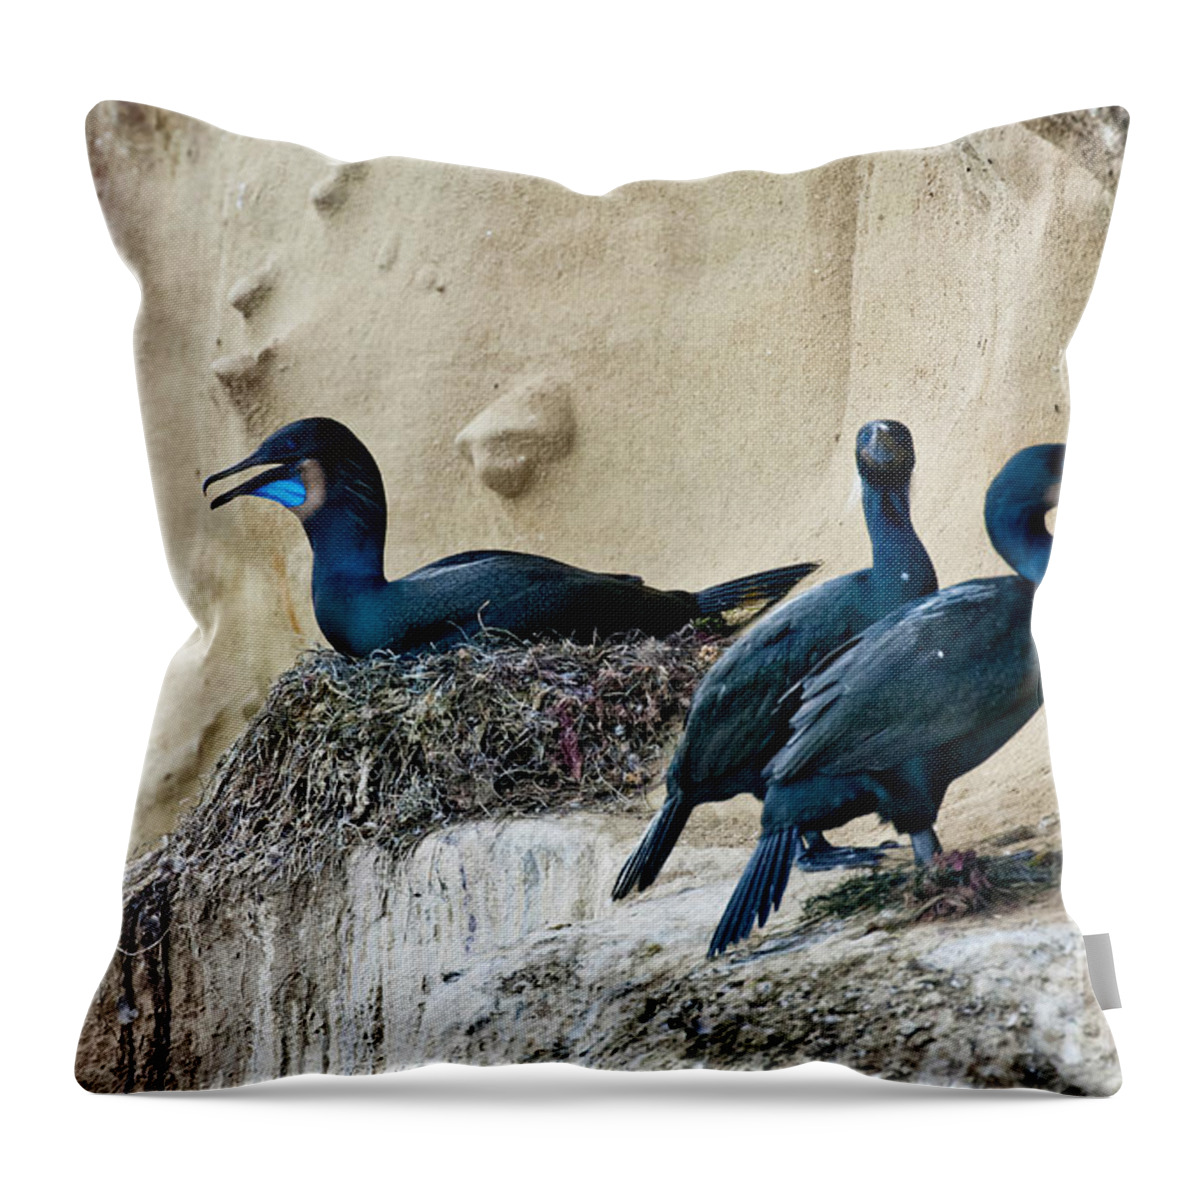 Brandt Throw Pillow featuring the photograph Brandts Cormorant Nesting On Cliff by Anthony Mercieca